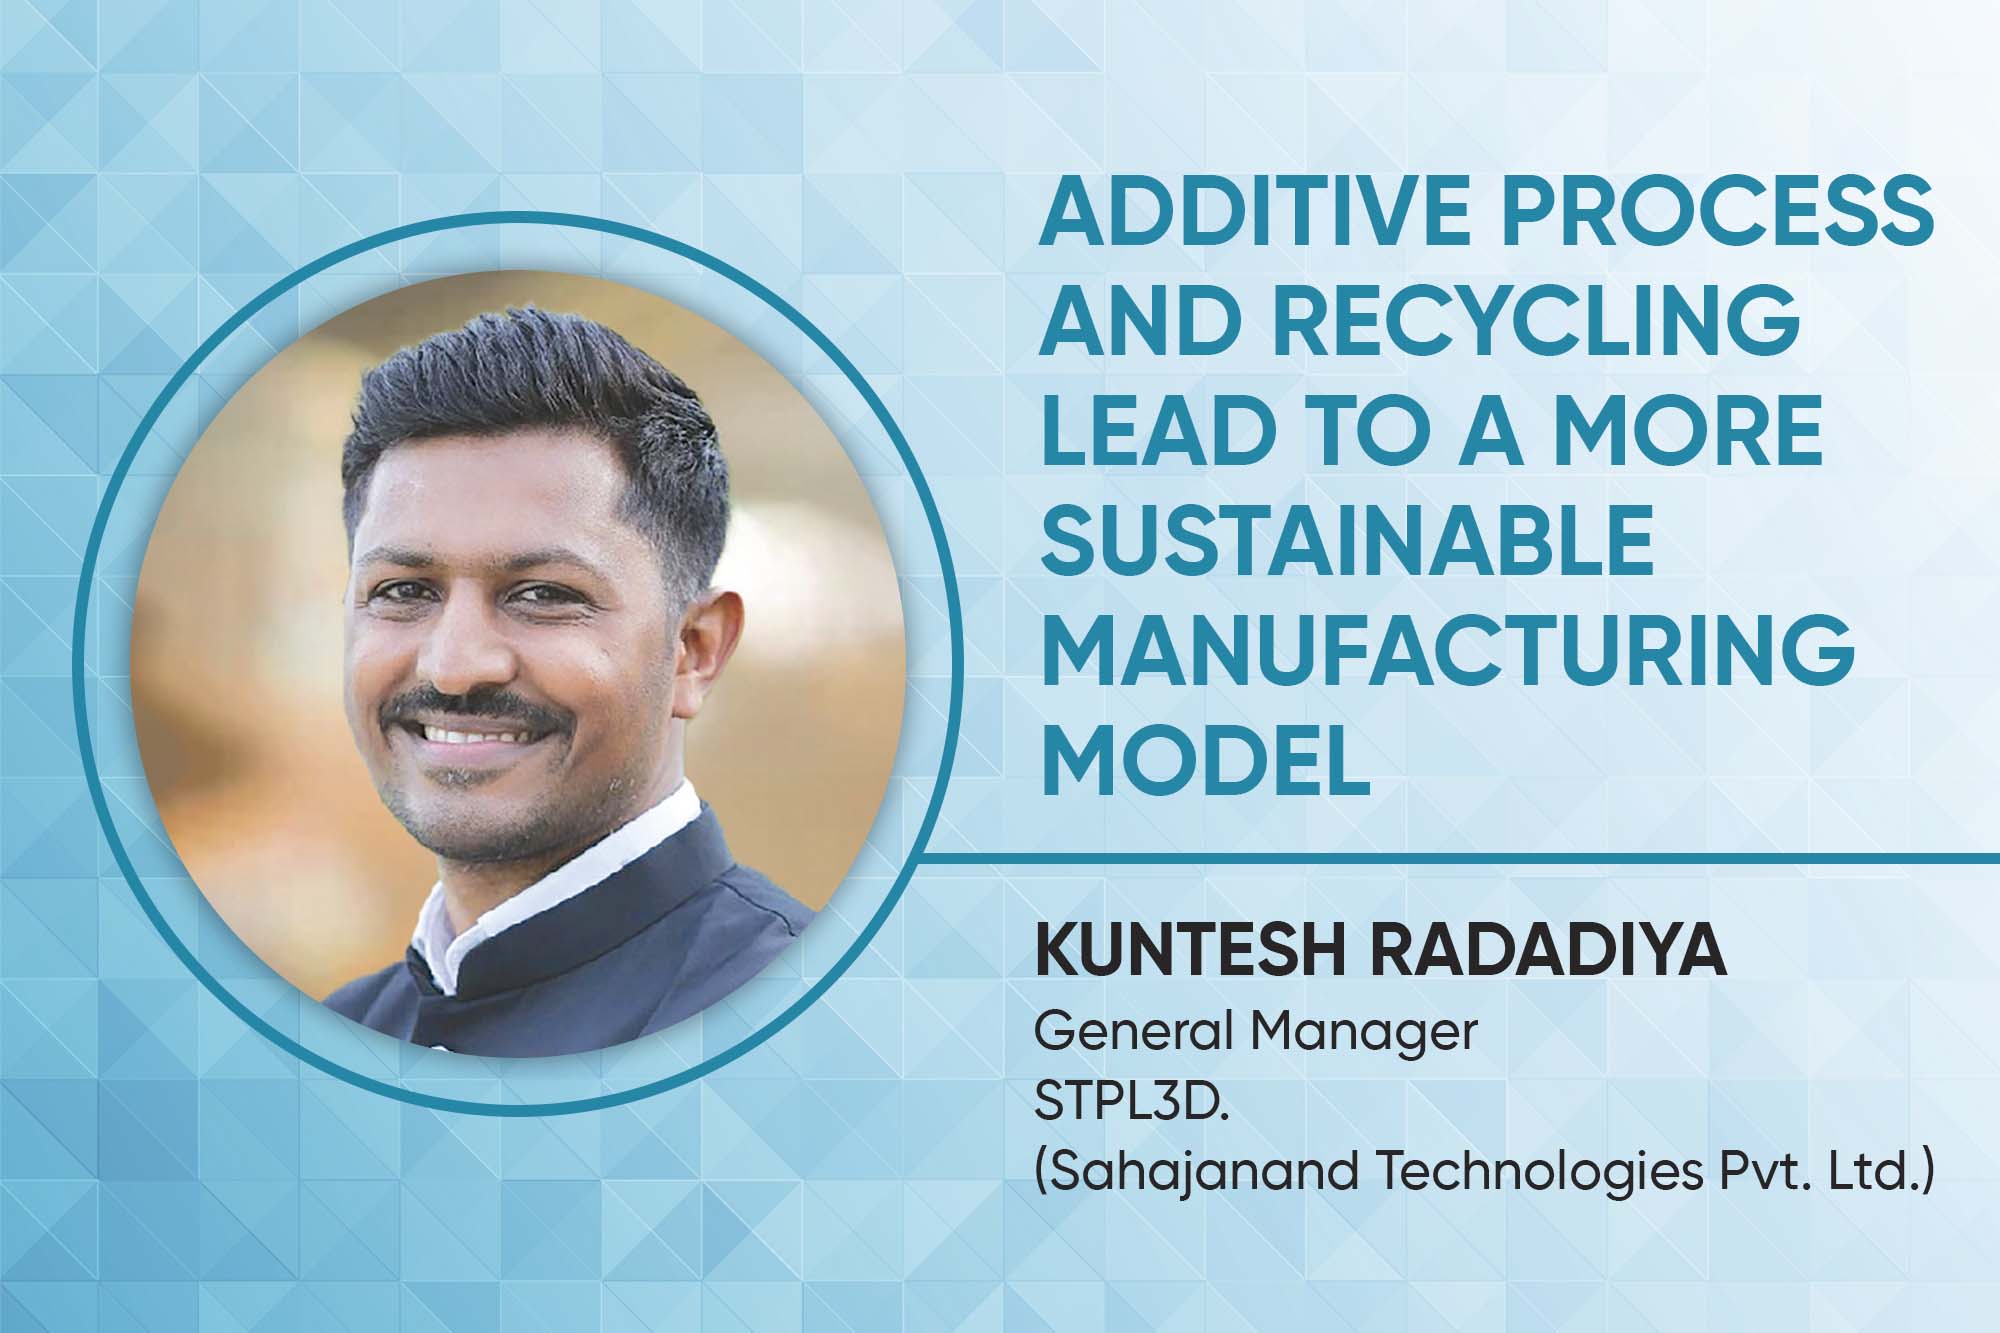 Additive process and recycling lead to a more sustainable manufacturing model